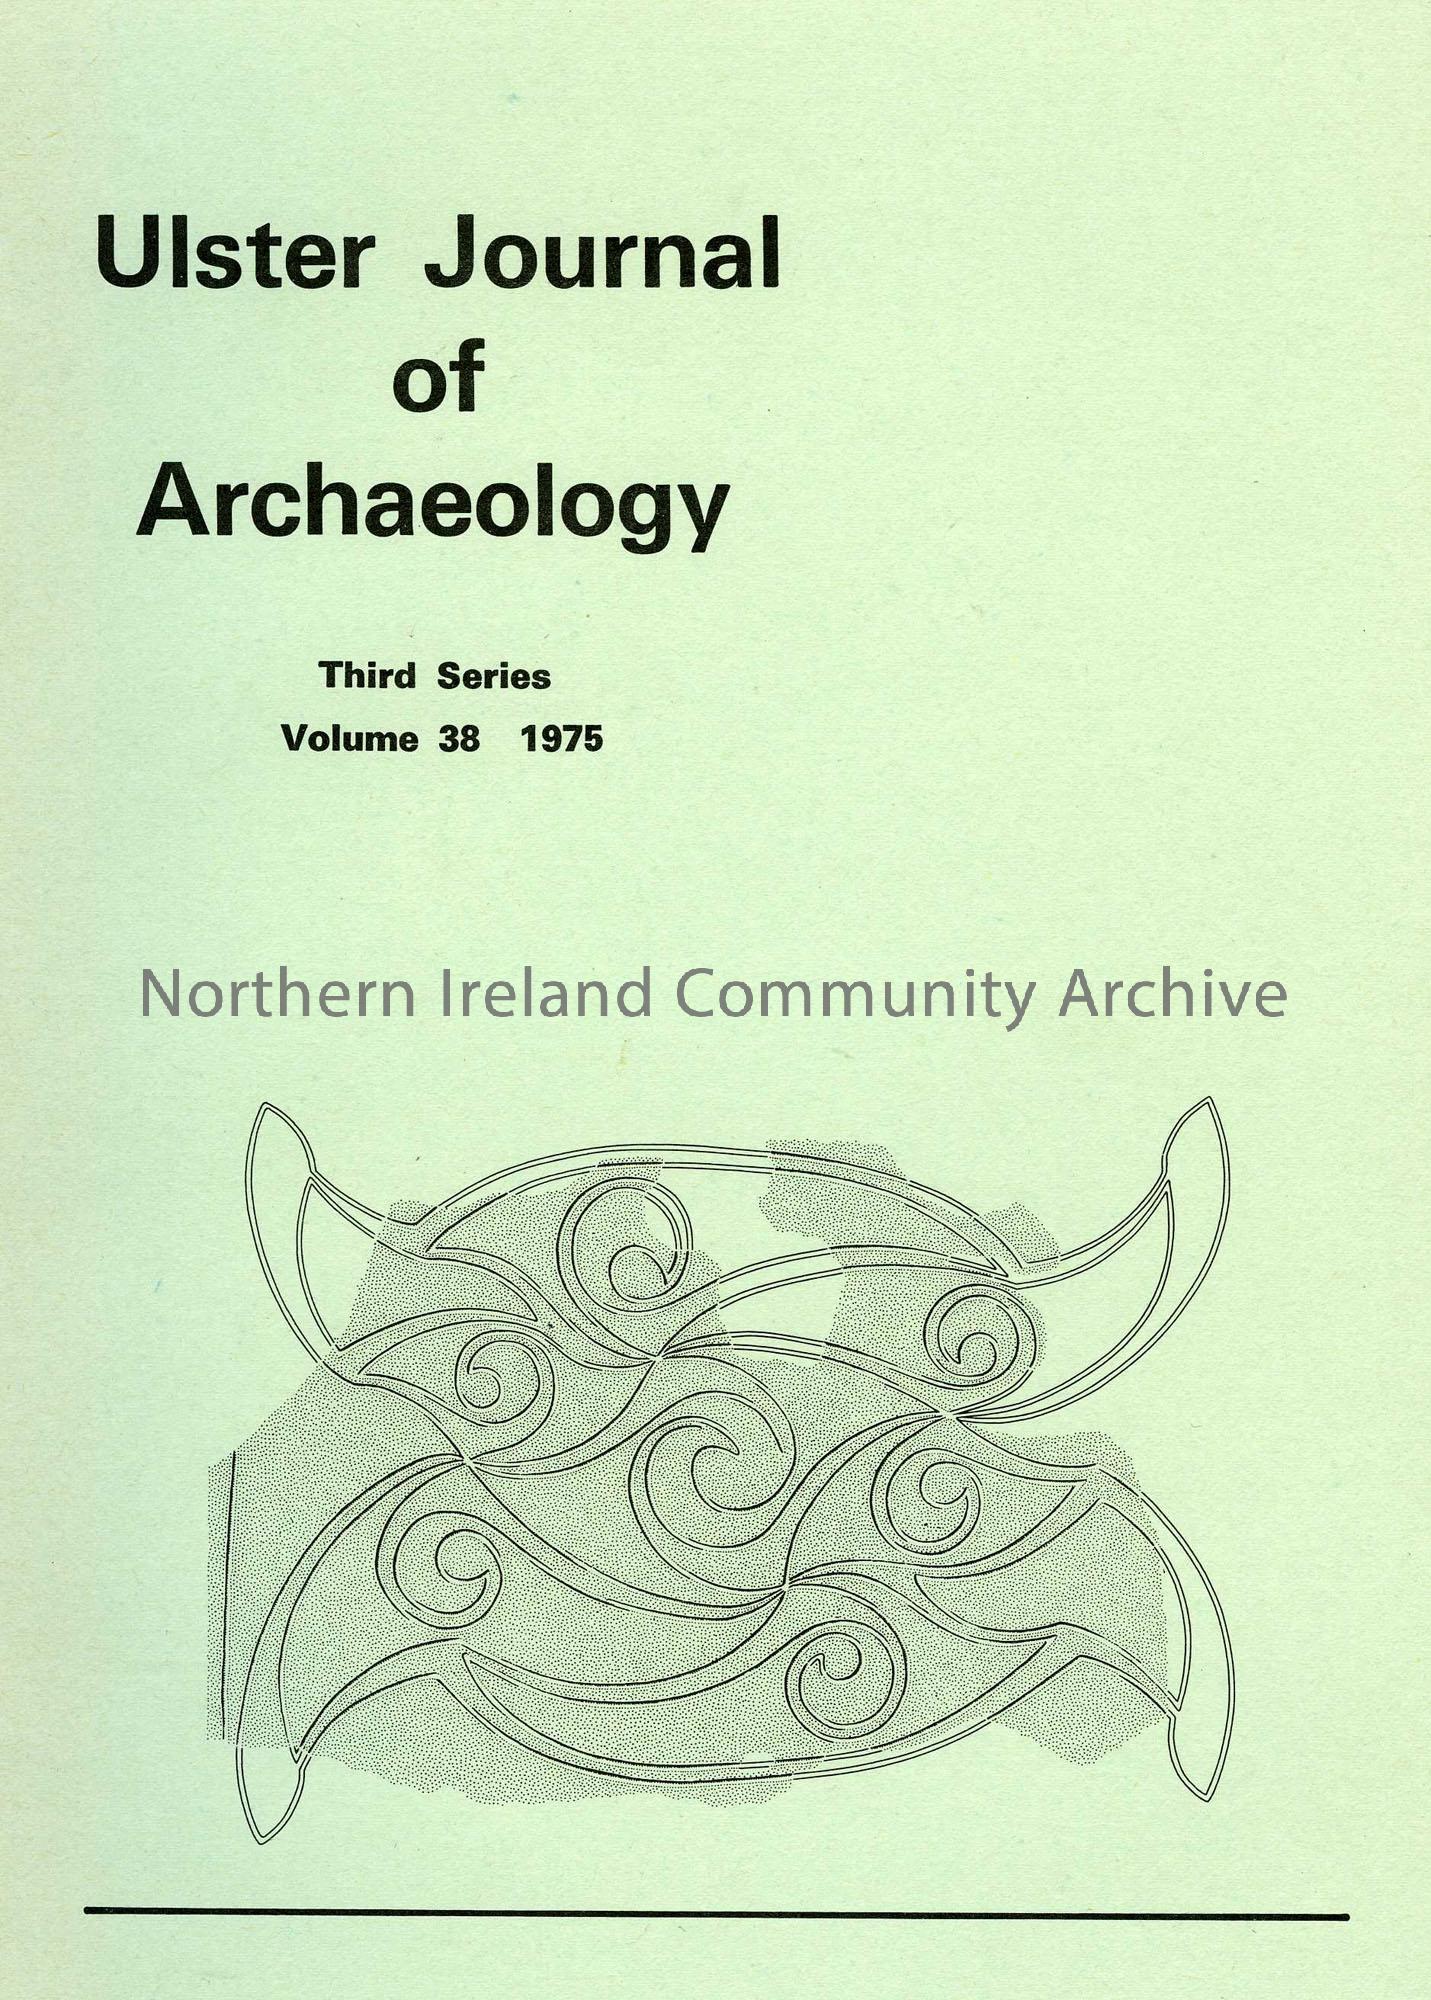 book titled, Ulster Journal of Archaeology. Third Series Volume 38, 1975 (6328)